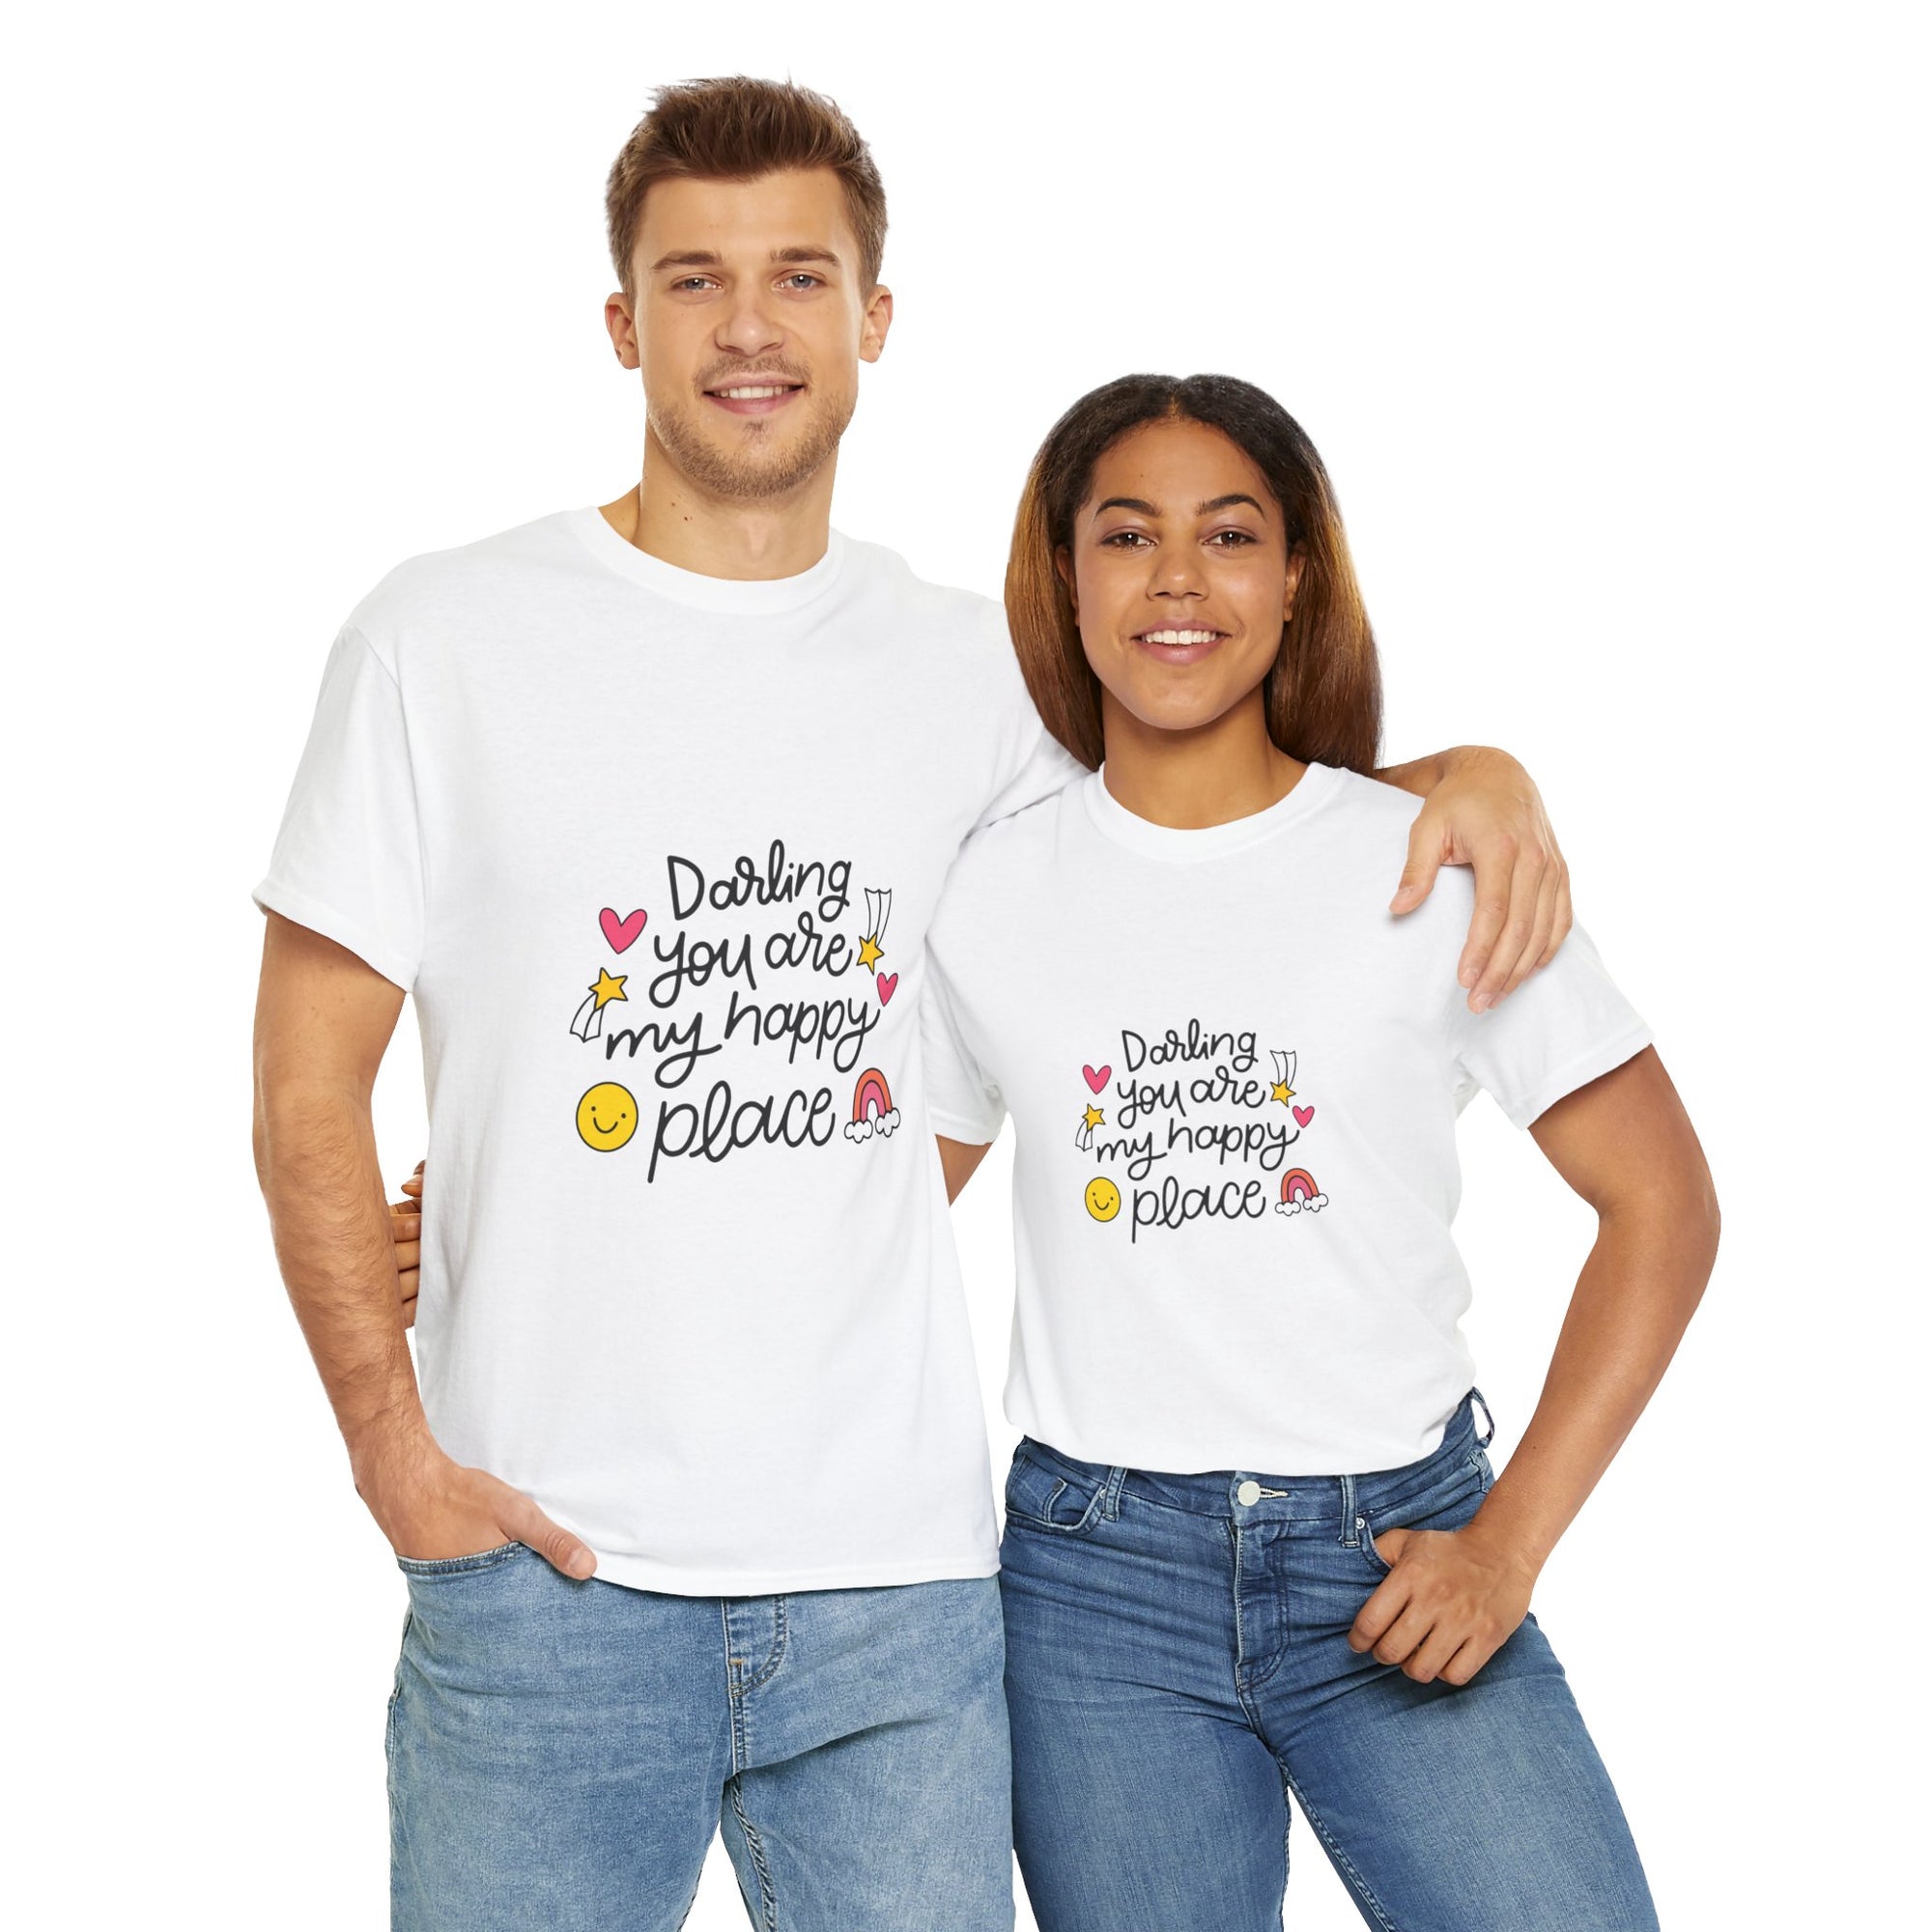 Affectionate Message T-Shirt "Darling You Are My Happy Place"